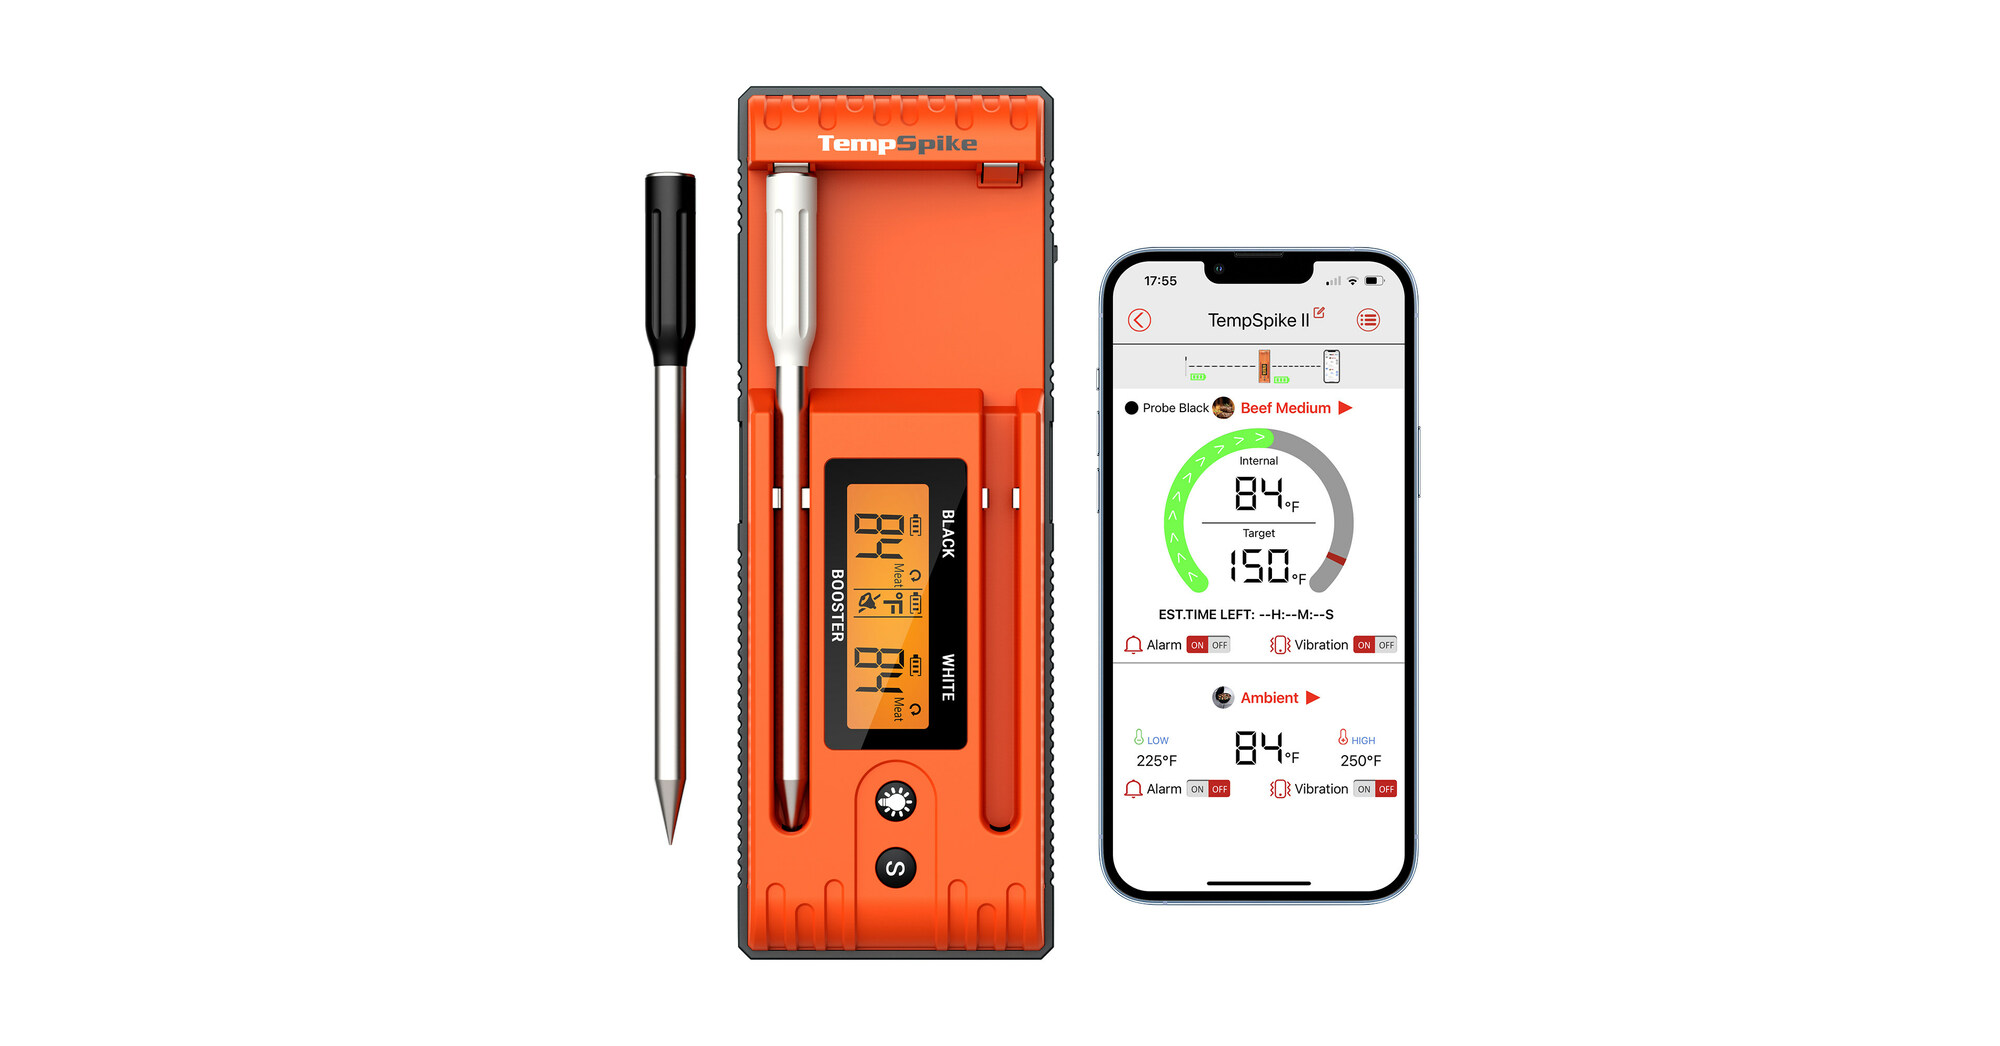 Meat Thermometers, Double Probe Meat Thermometer With Alarm